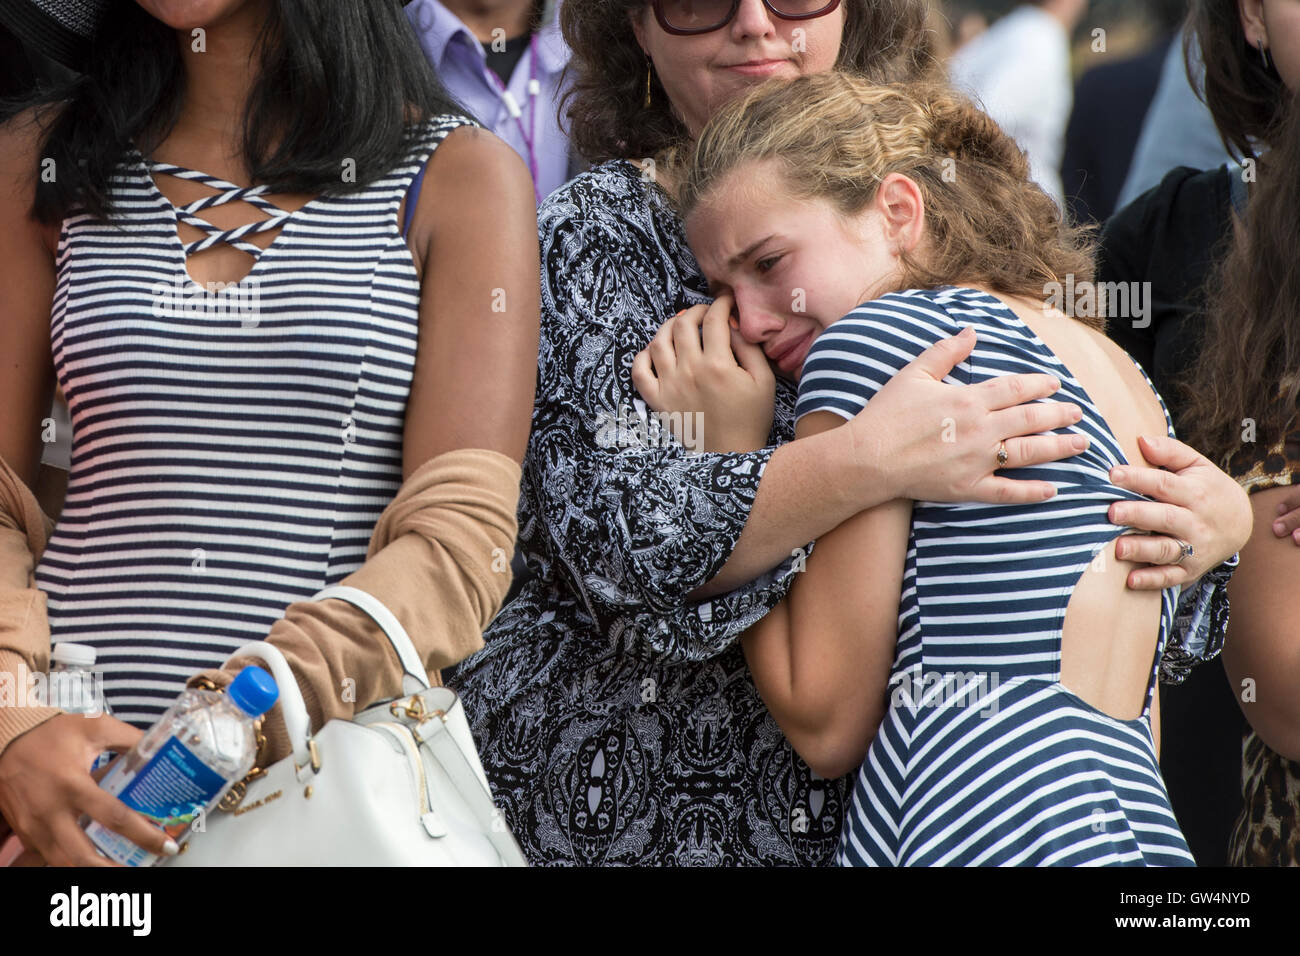 Rachael Fisher, 12, reacts during a remembrance ceremony commemorating the 15th anniversary of the 9/11 terrorist attacks at the Pentagon September 11, 2016 in Arlington, Virginia. Fishers grandfather, Gerald Fisher, died during the attacks on the Pentagon. Stock Photo